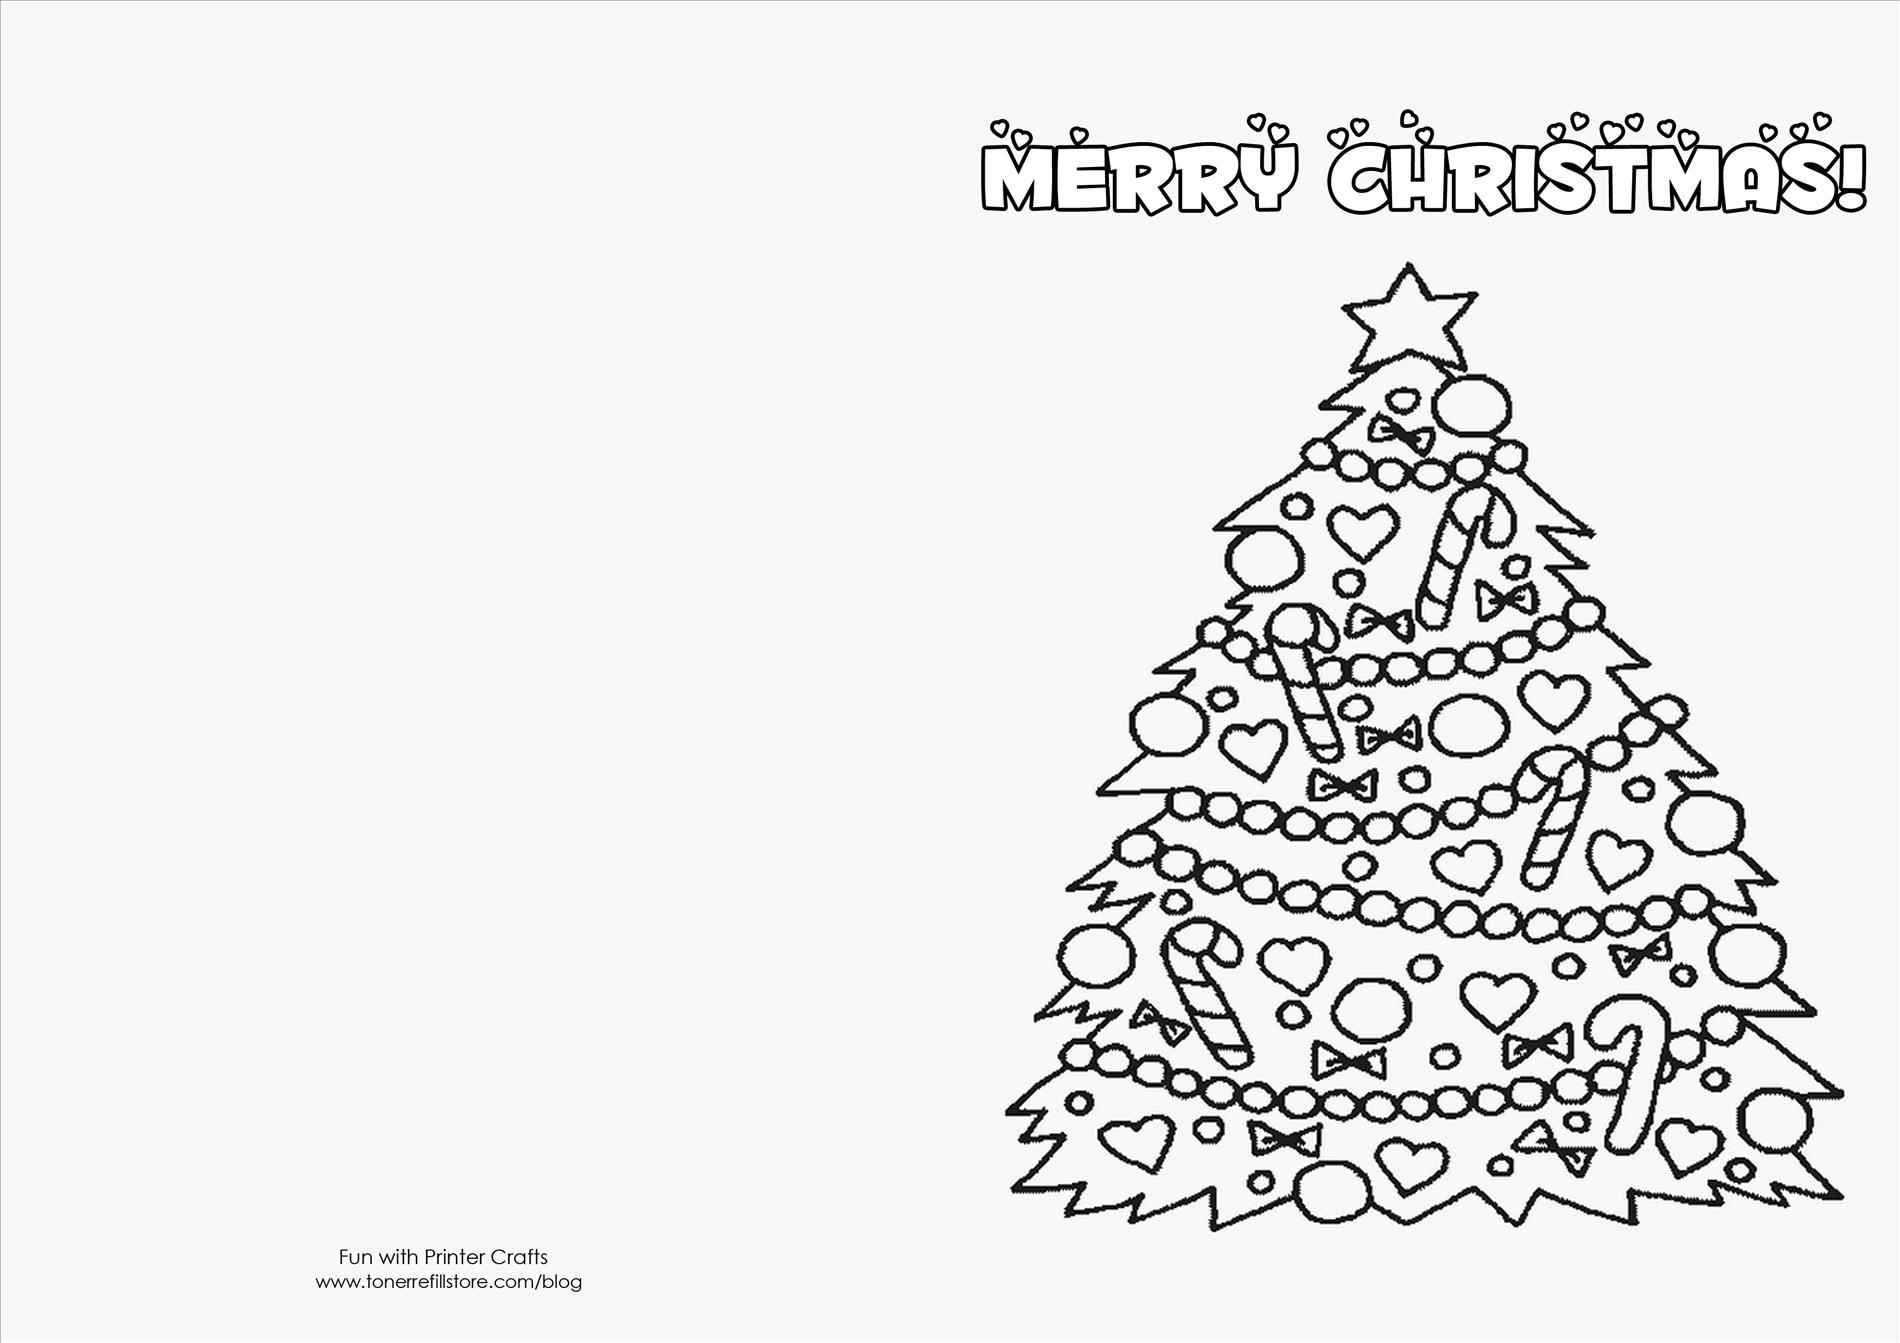 Printable Christmas Cards Templates | Theveliger In Printable Holiday Card Templates